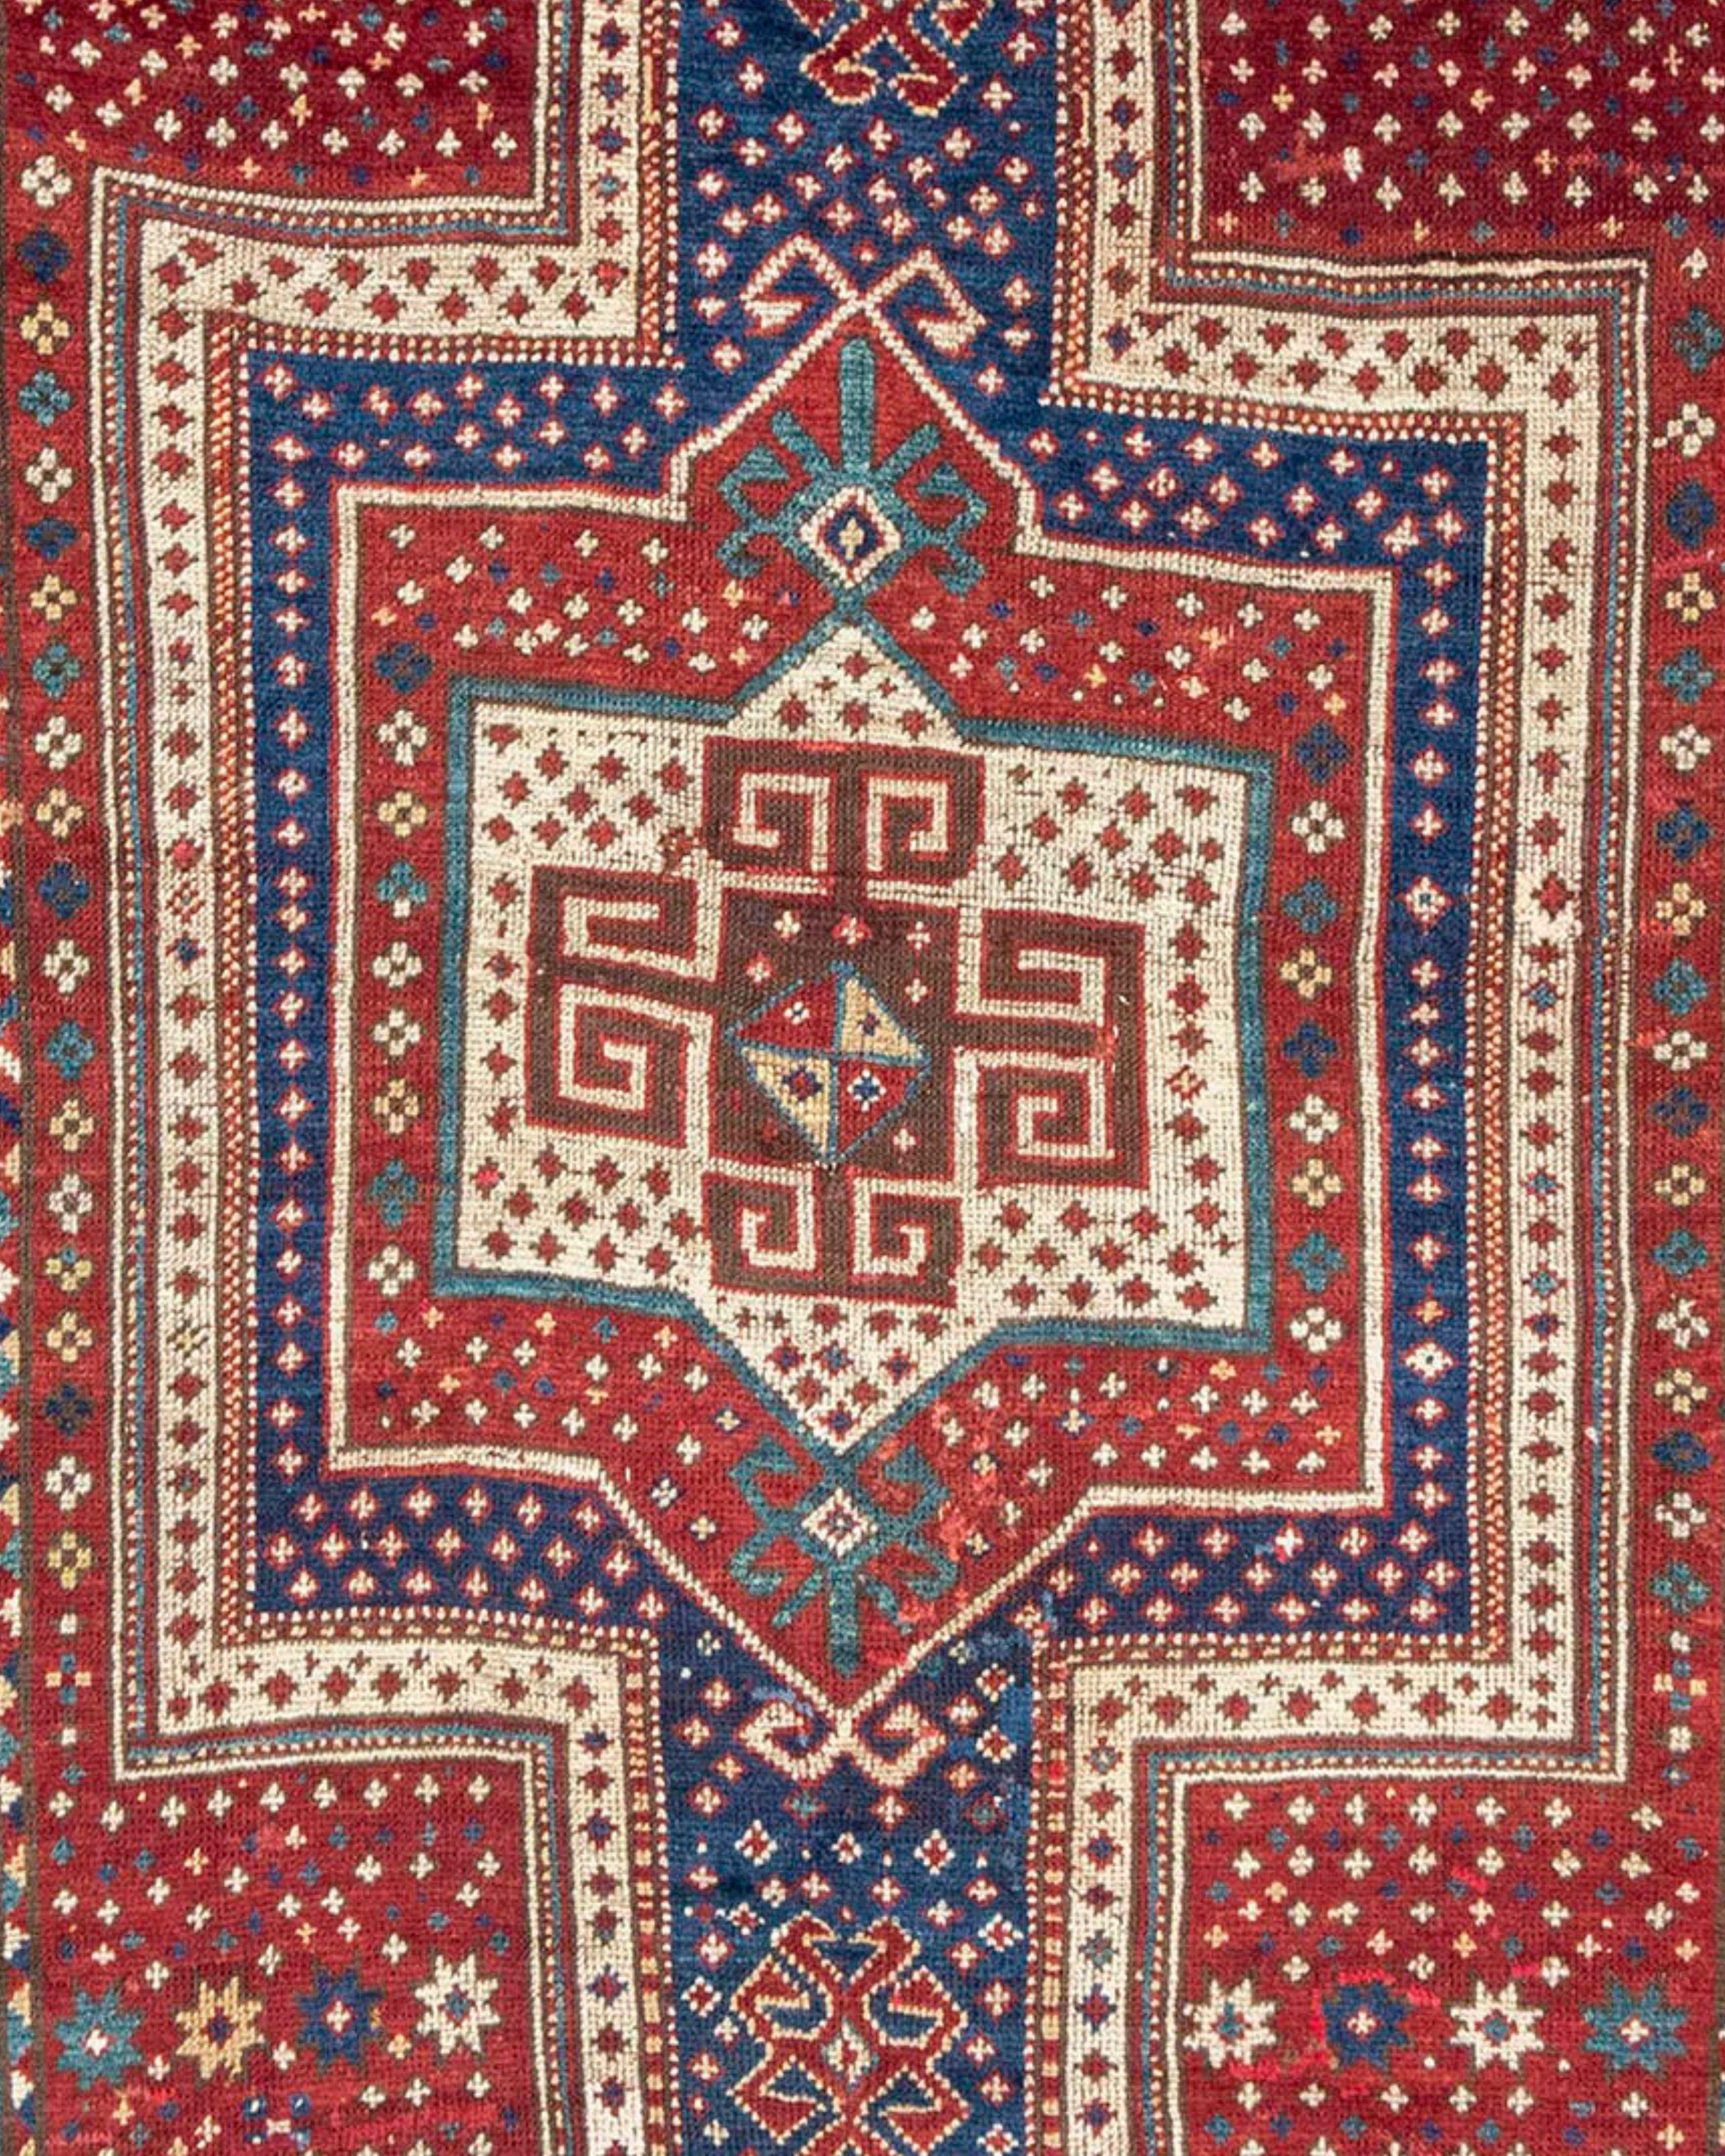 Antique Kazak Rug, Late 19th Century

Collection of Dr. and Mrs. William T. Price

Additional Information:
Dimensions: 5'2